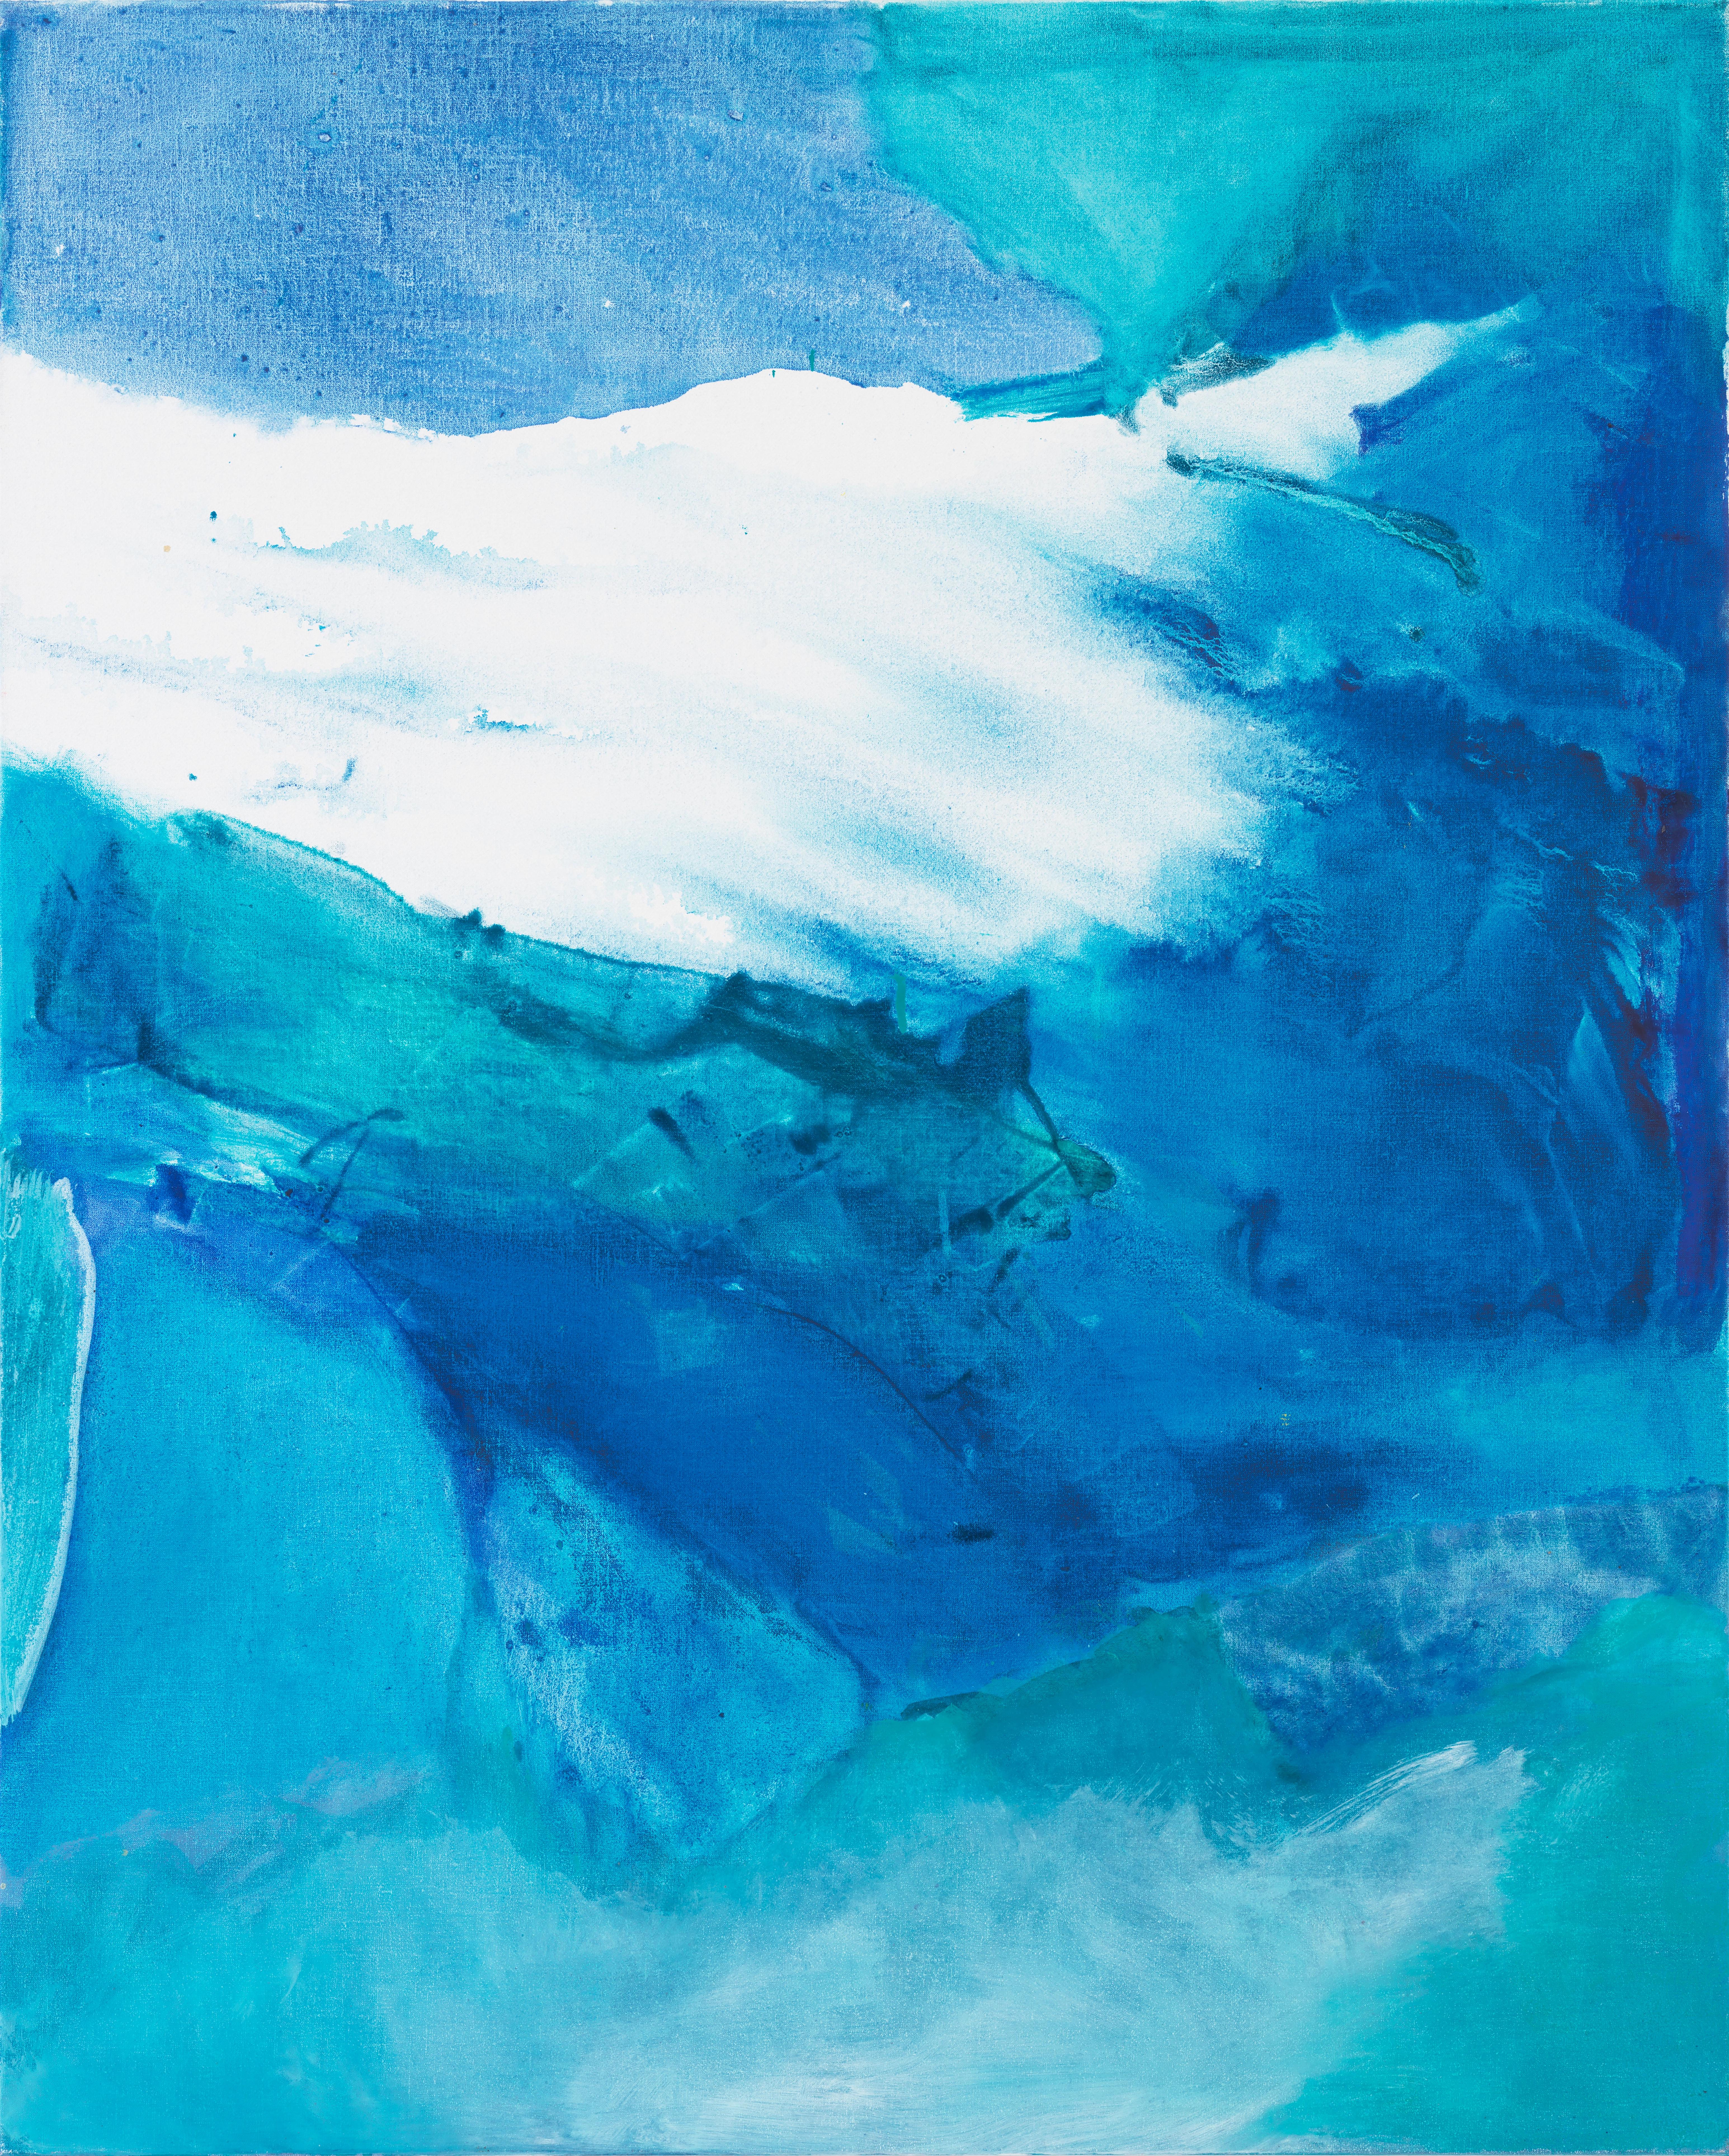 Abstract oil painting of translucent dark blues, light blues, and green-blue brushstrokes. A streak of white enters from the upper left side of the canvas, reaching towards the right side.